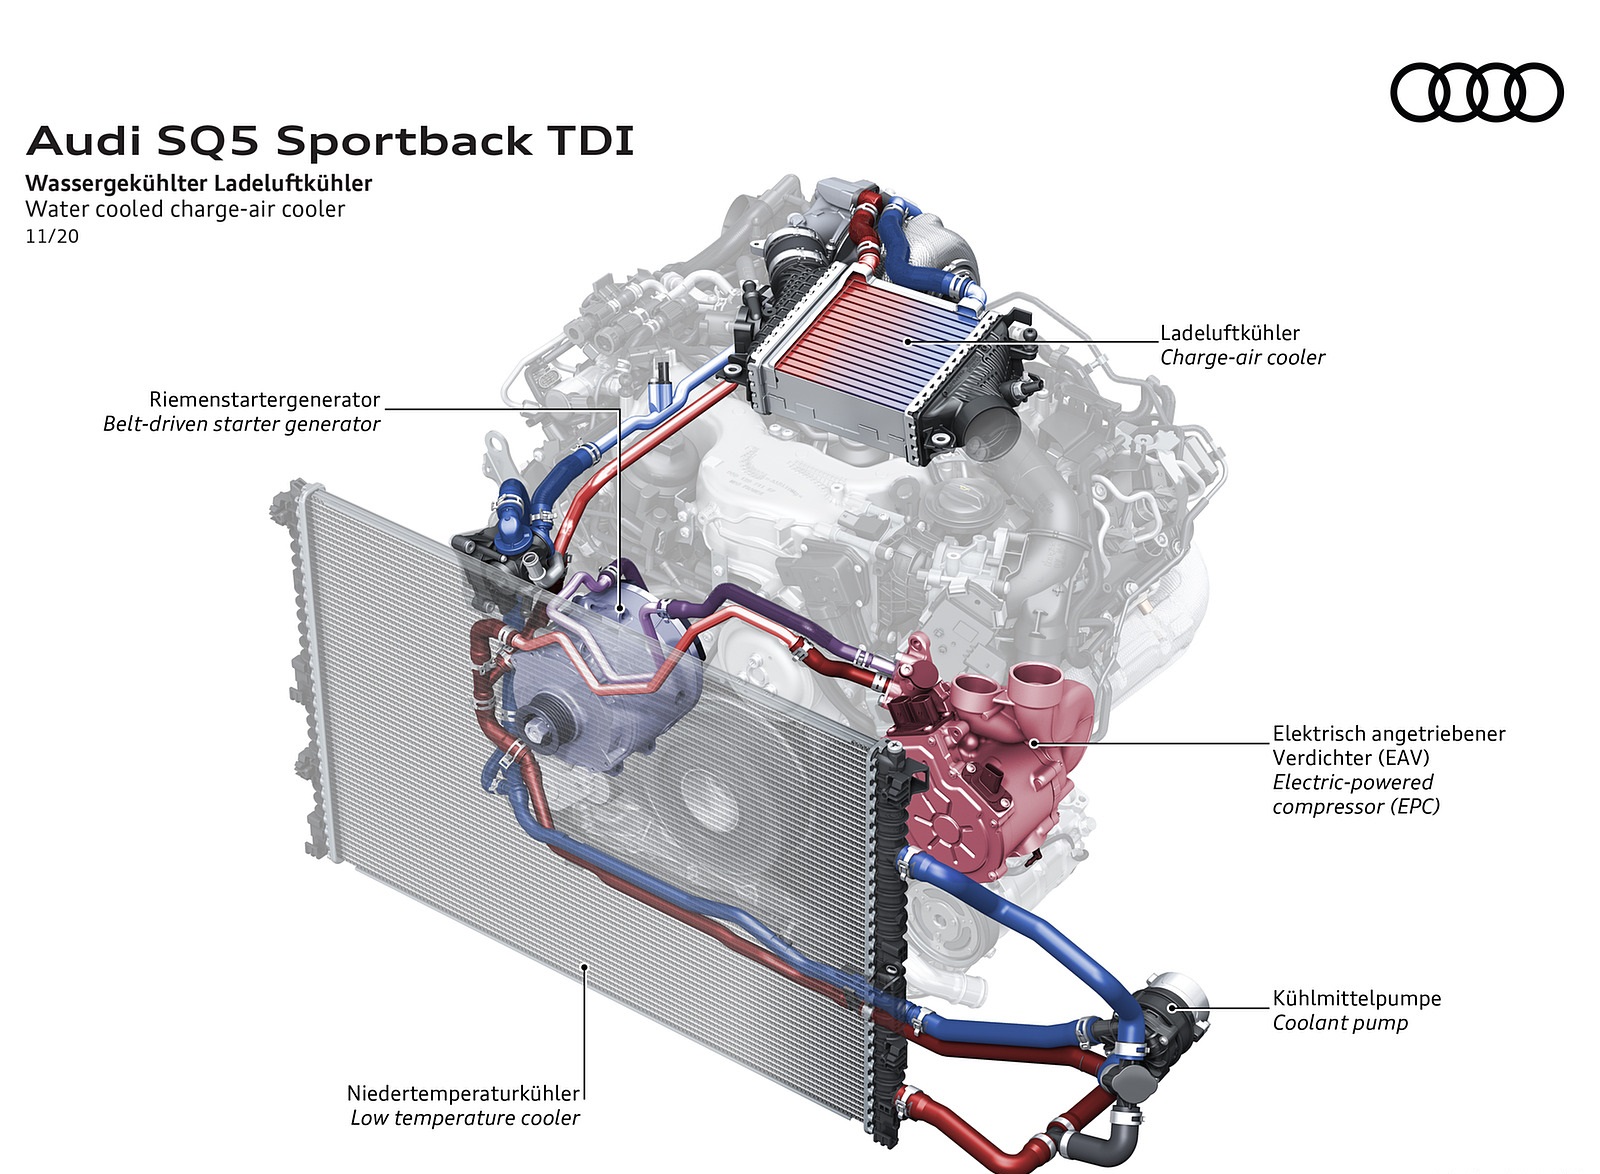 2021 Audi SQ5 Sportback TDI Water cooled charge-air cooler Wallpapers #57 of 58